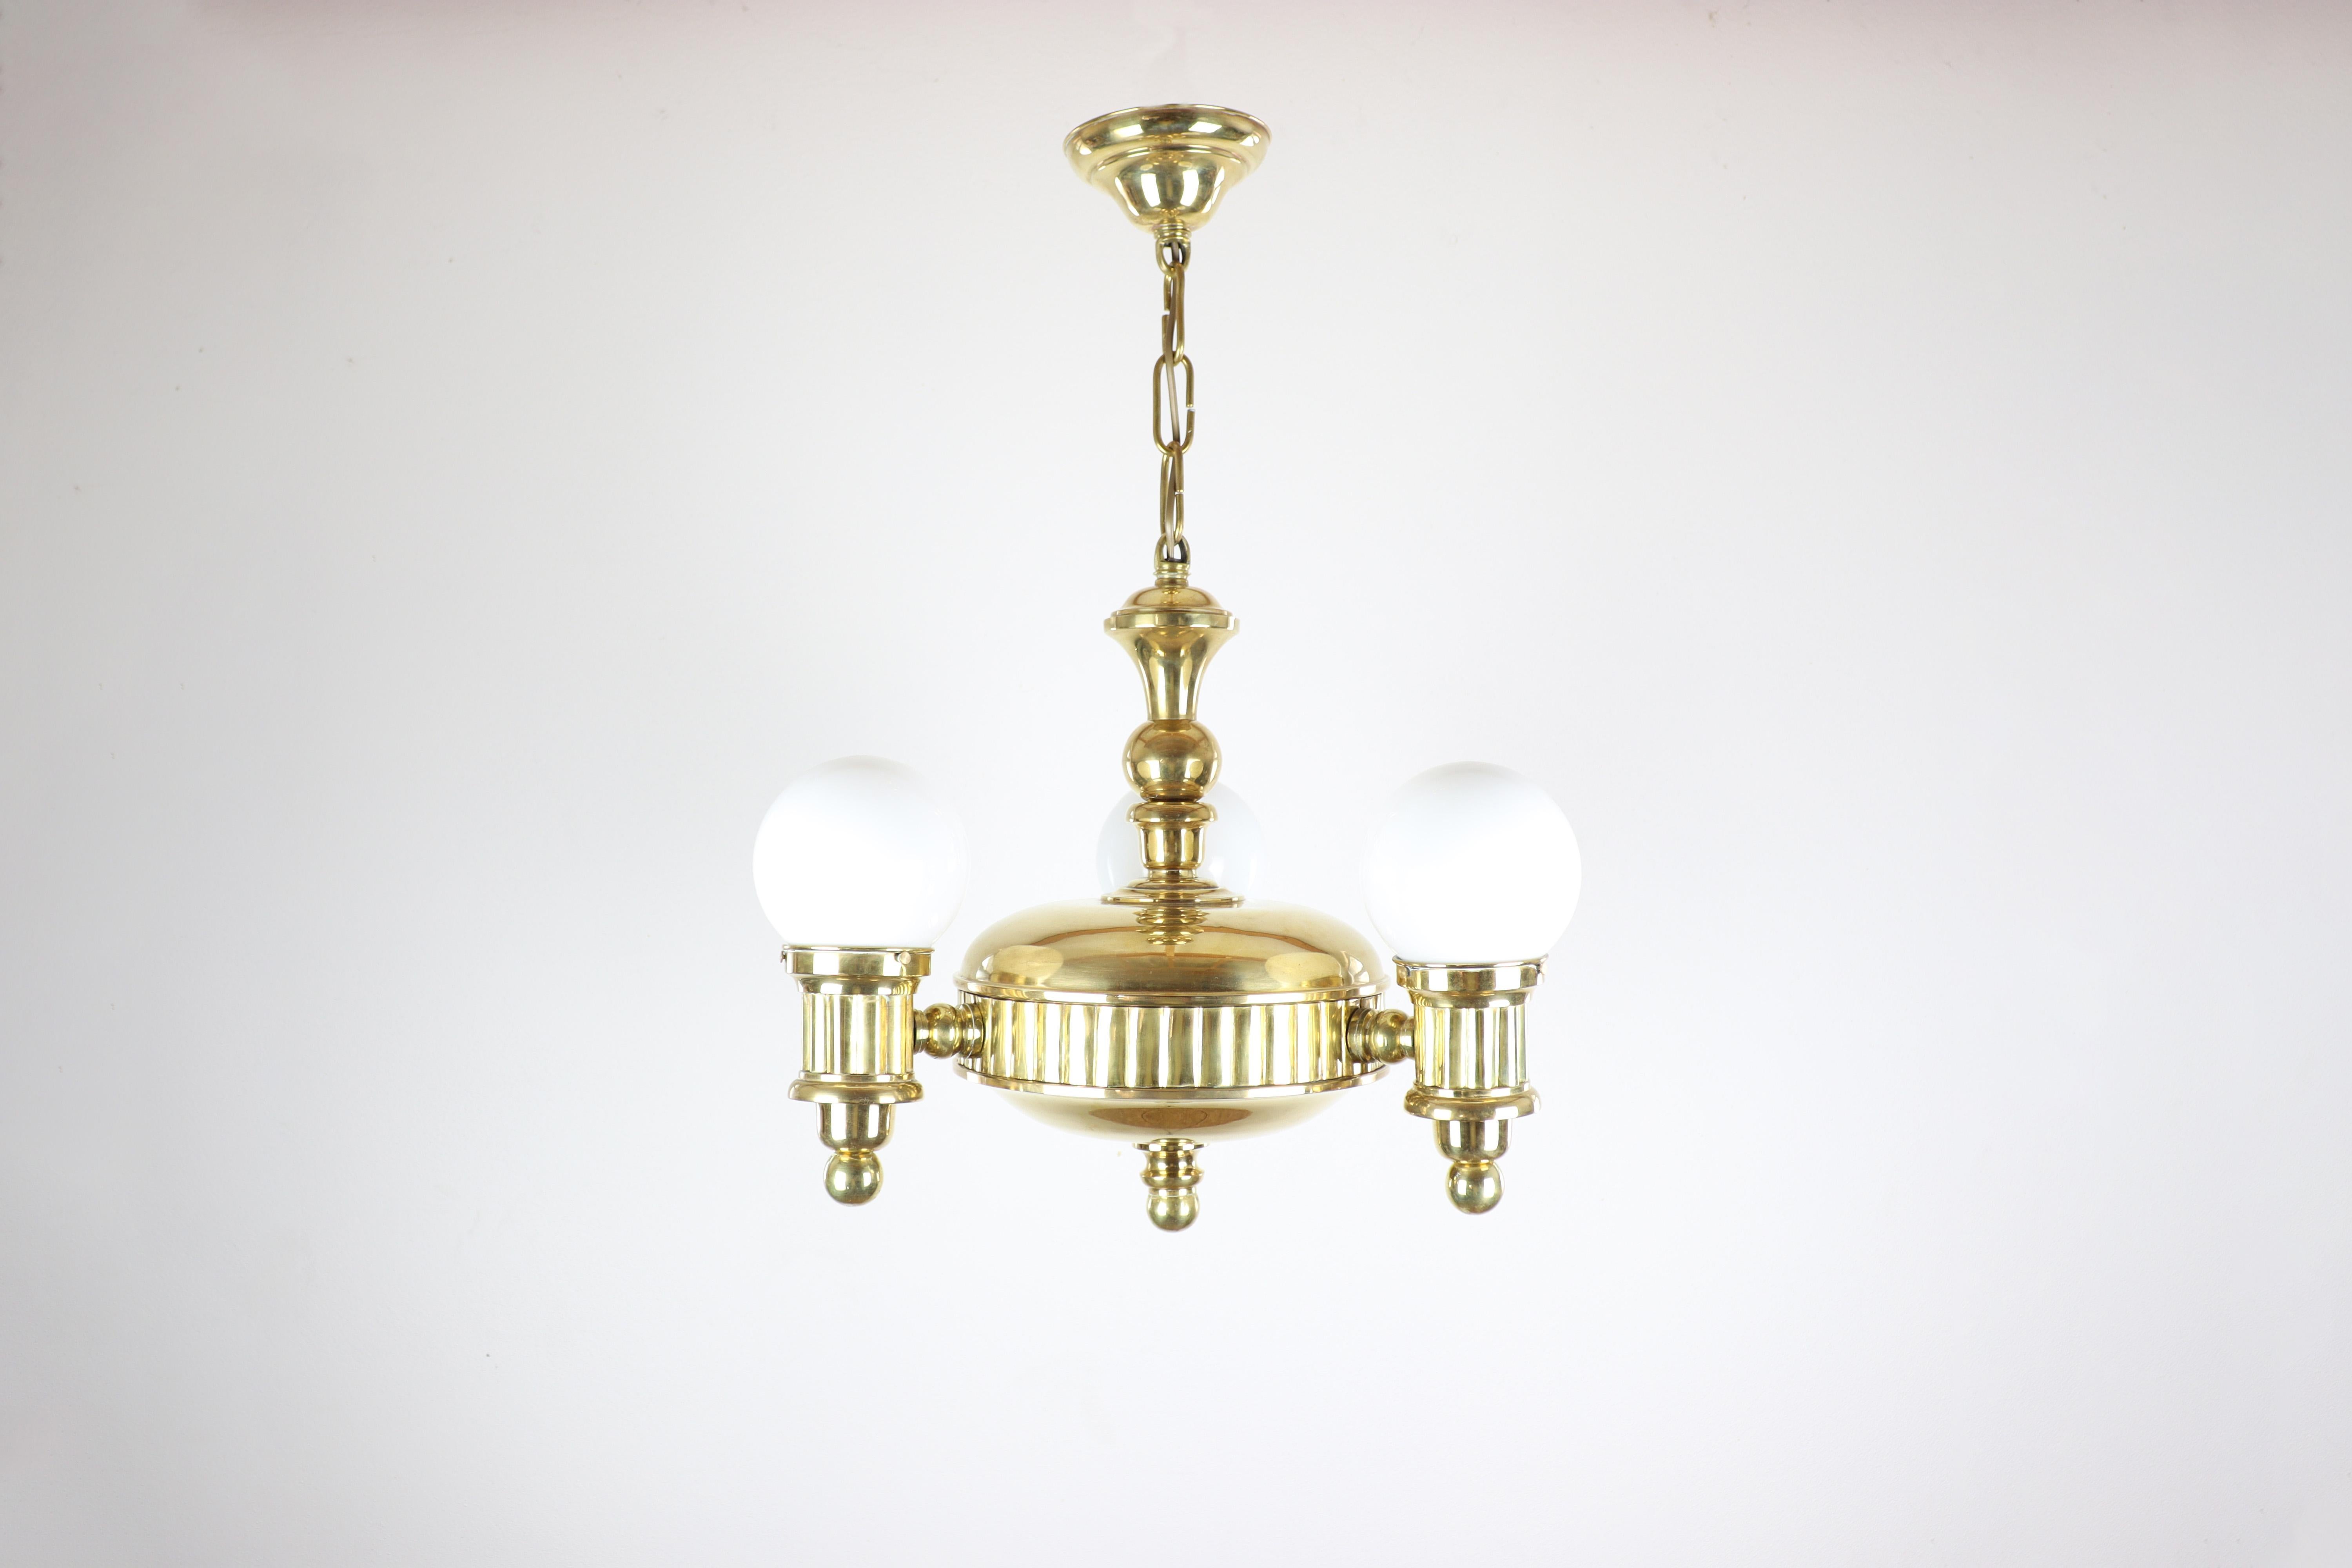 Exclusive Art Deco Chandelier with Swivel Arms 'Three-Arm Design' In Good Condition For Sale In Brno, CZ